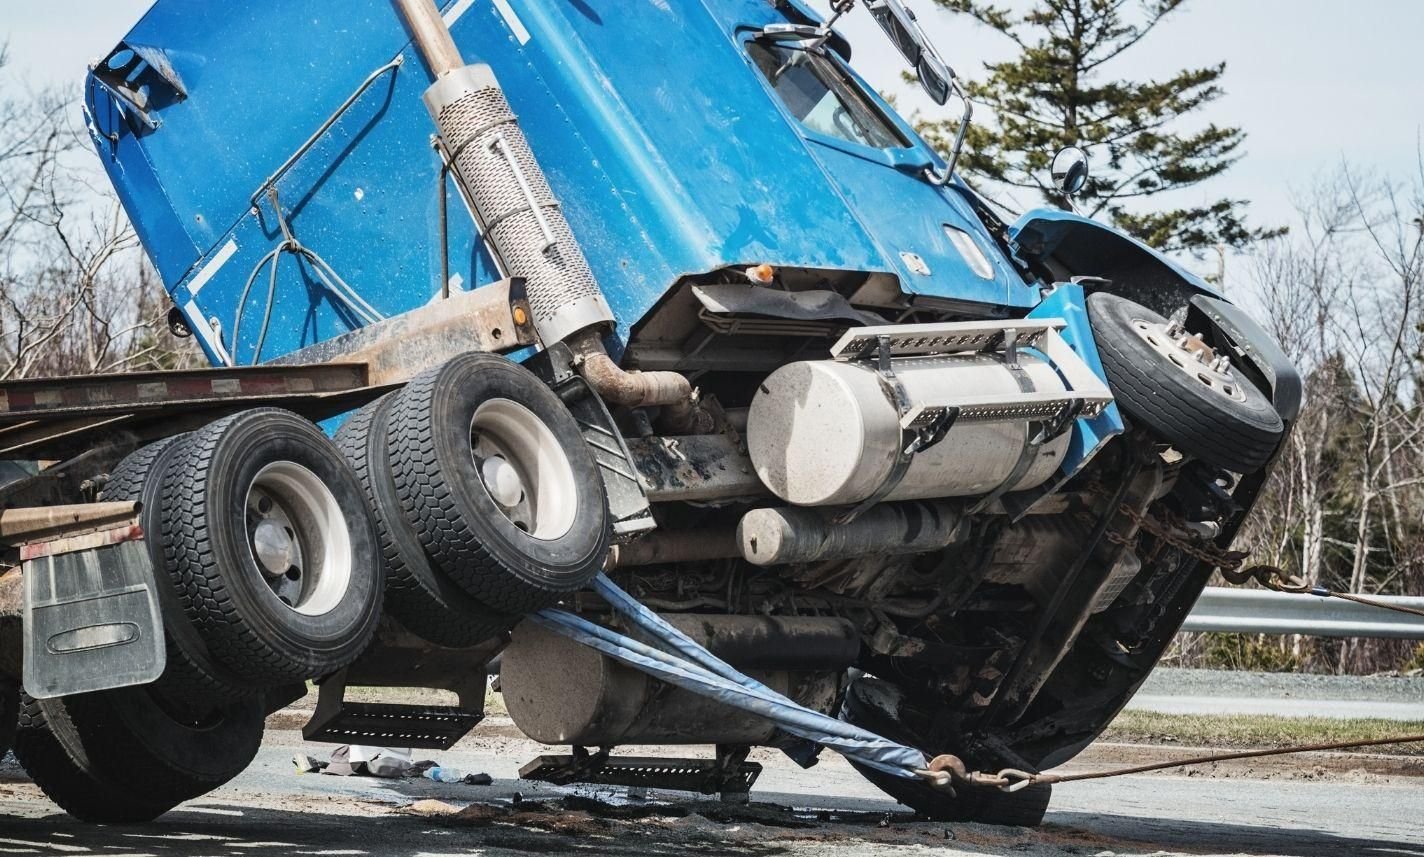 villa-rica-commercial-truck-accident-injury-lawyer